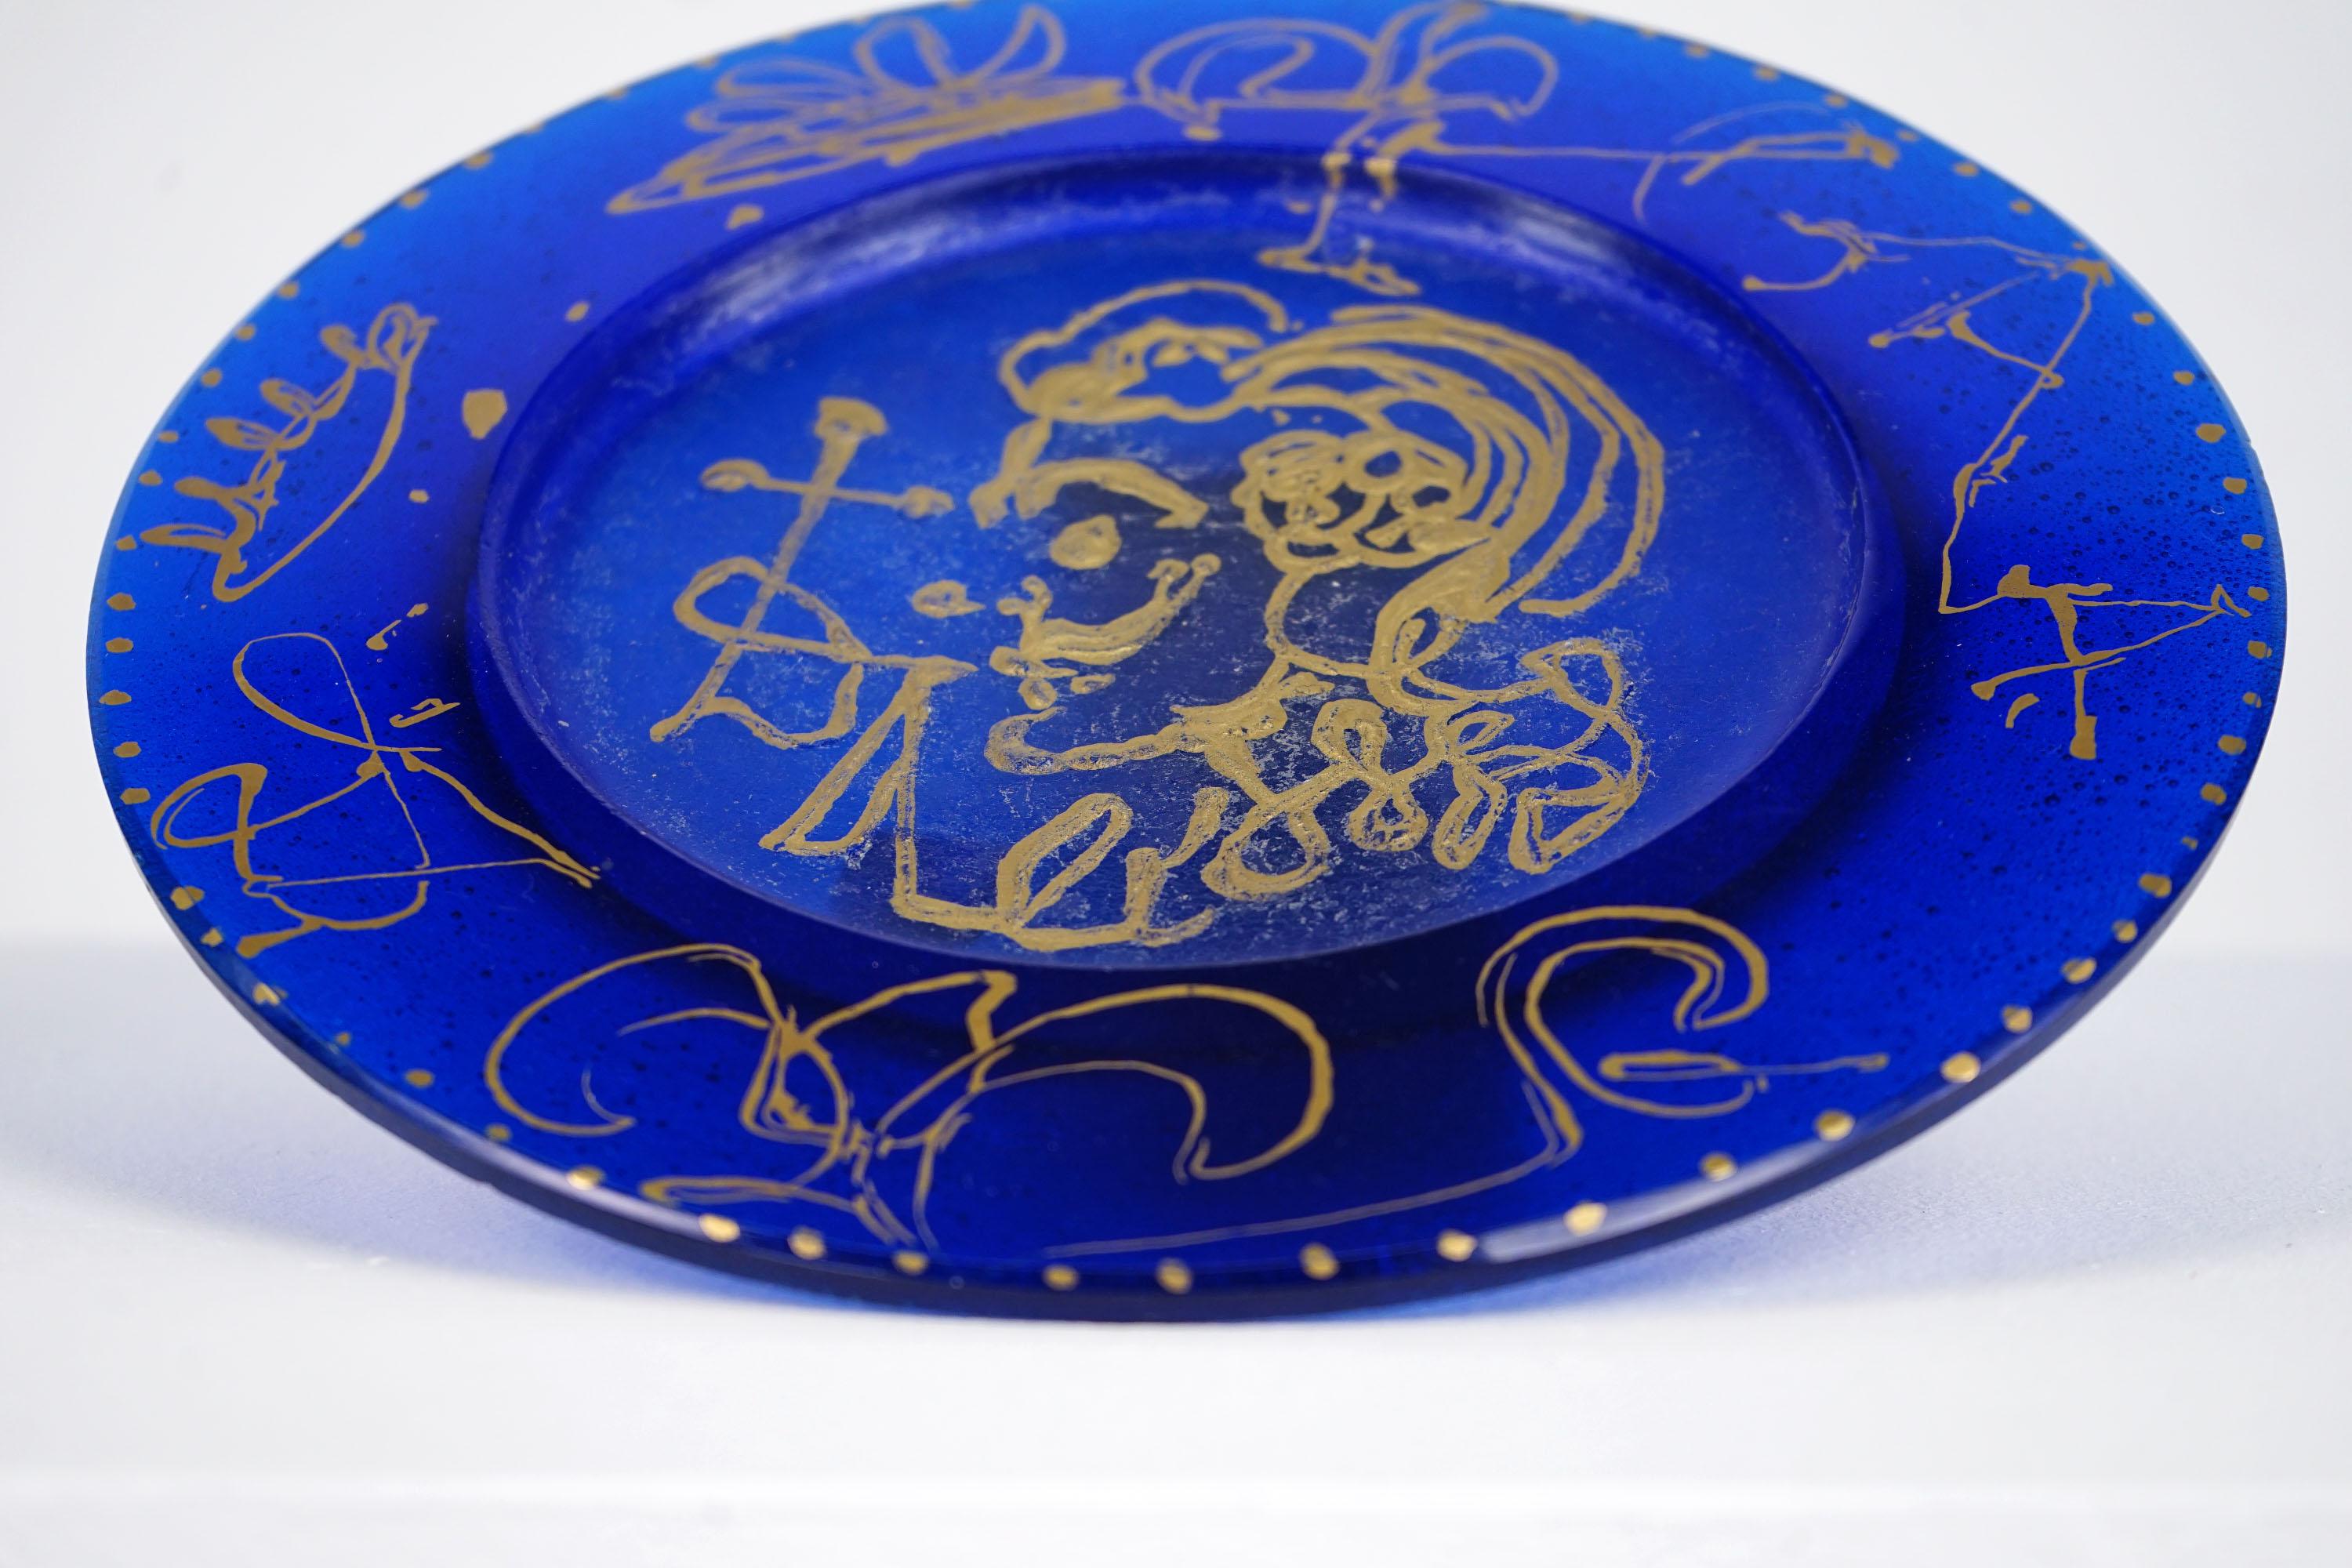 Triomphale plate of molten glass by Salvador Dalí. The Daum plate in blue and gold comes from France of the 1970s. The limited edition bears the number 891/200. The piece consists of Pate-de-Verre Glass with structure. It is in excellent condition.